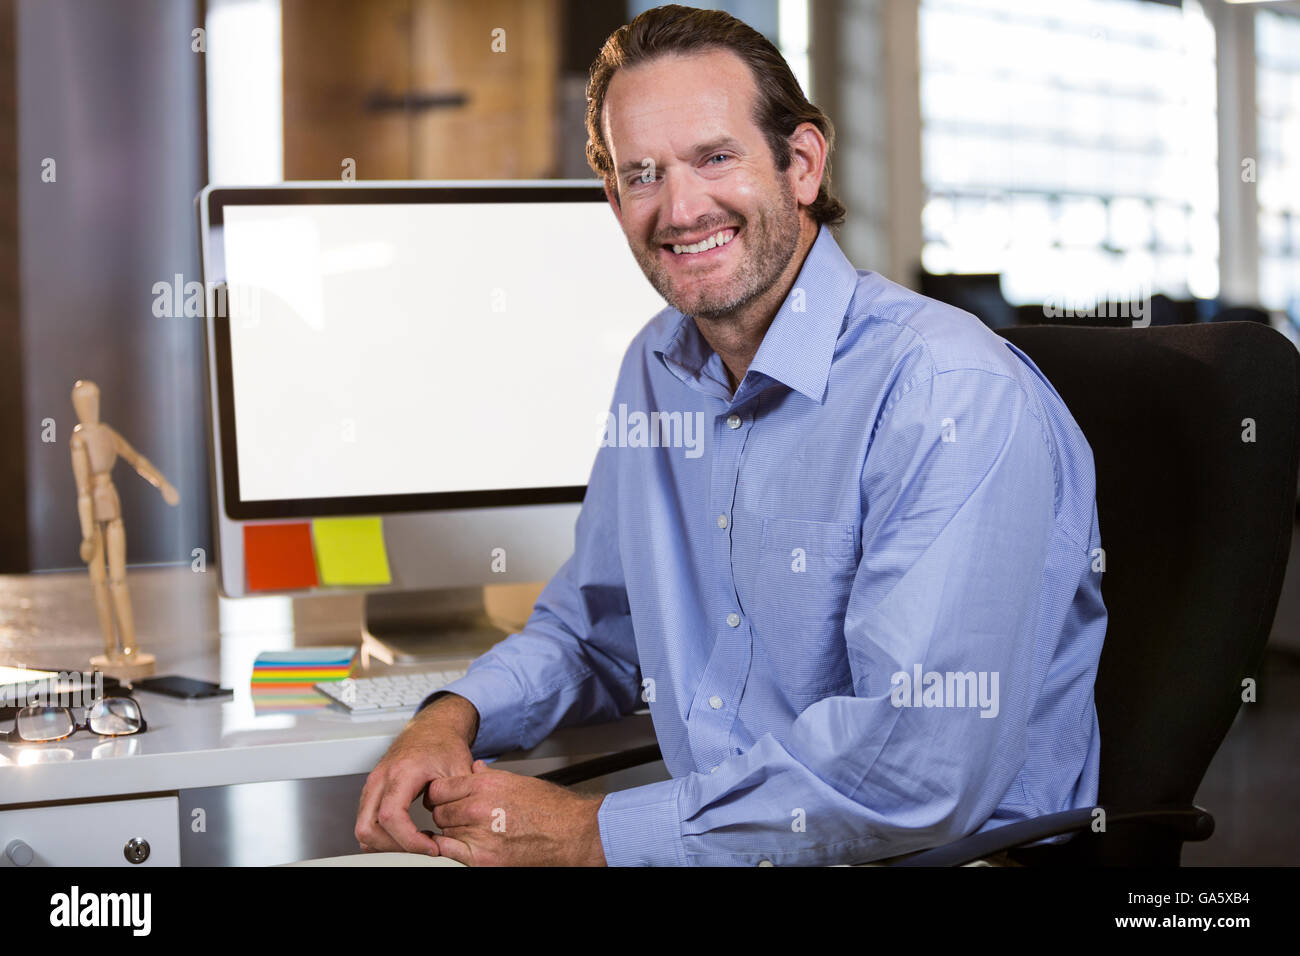 Smiling businessman sitting by computer desk Stock Photo